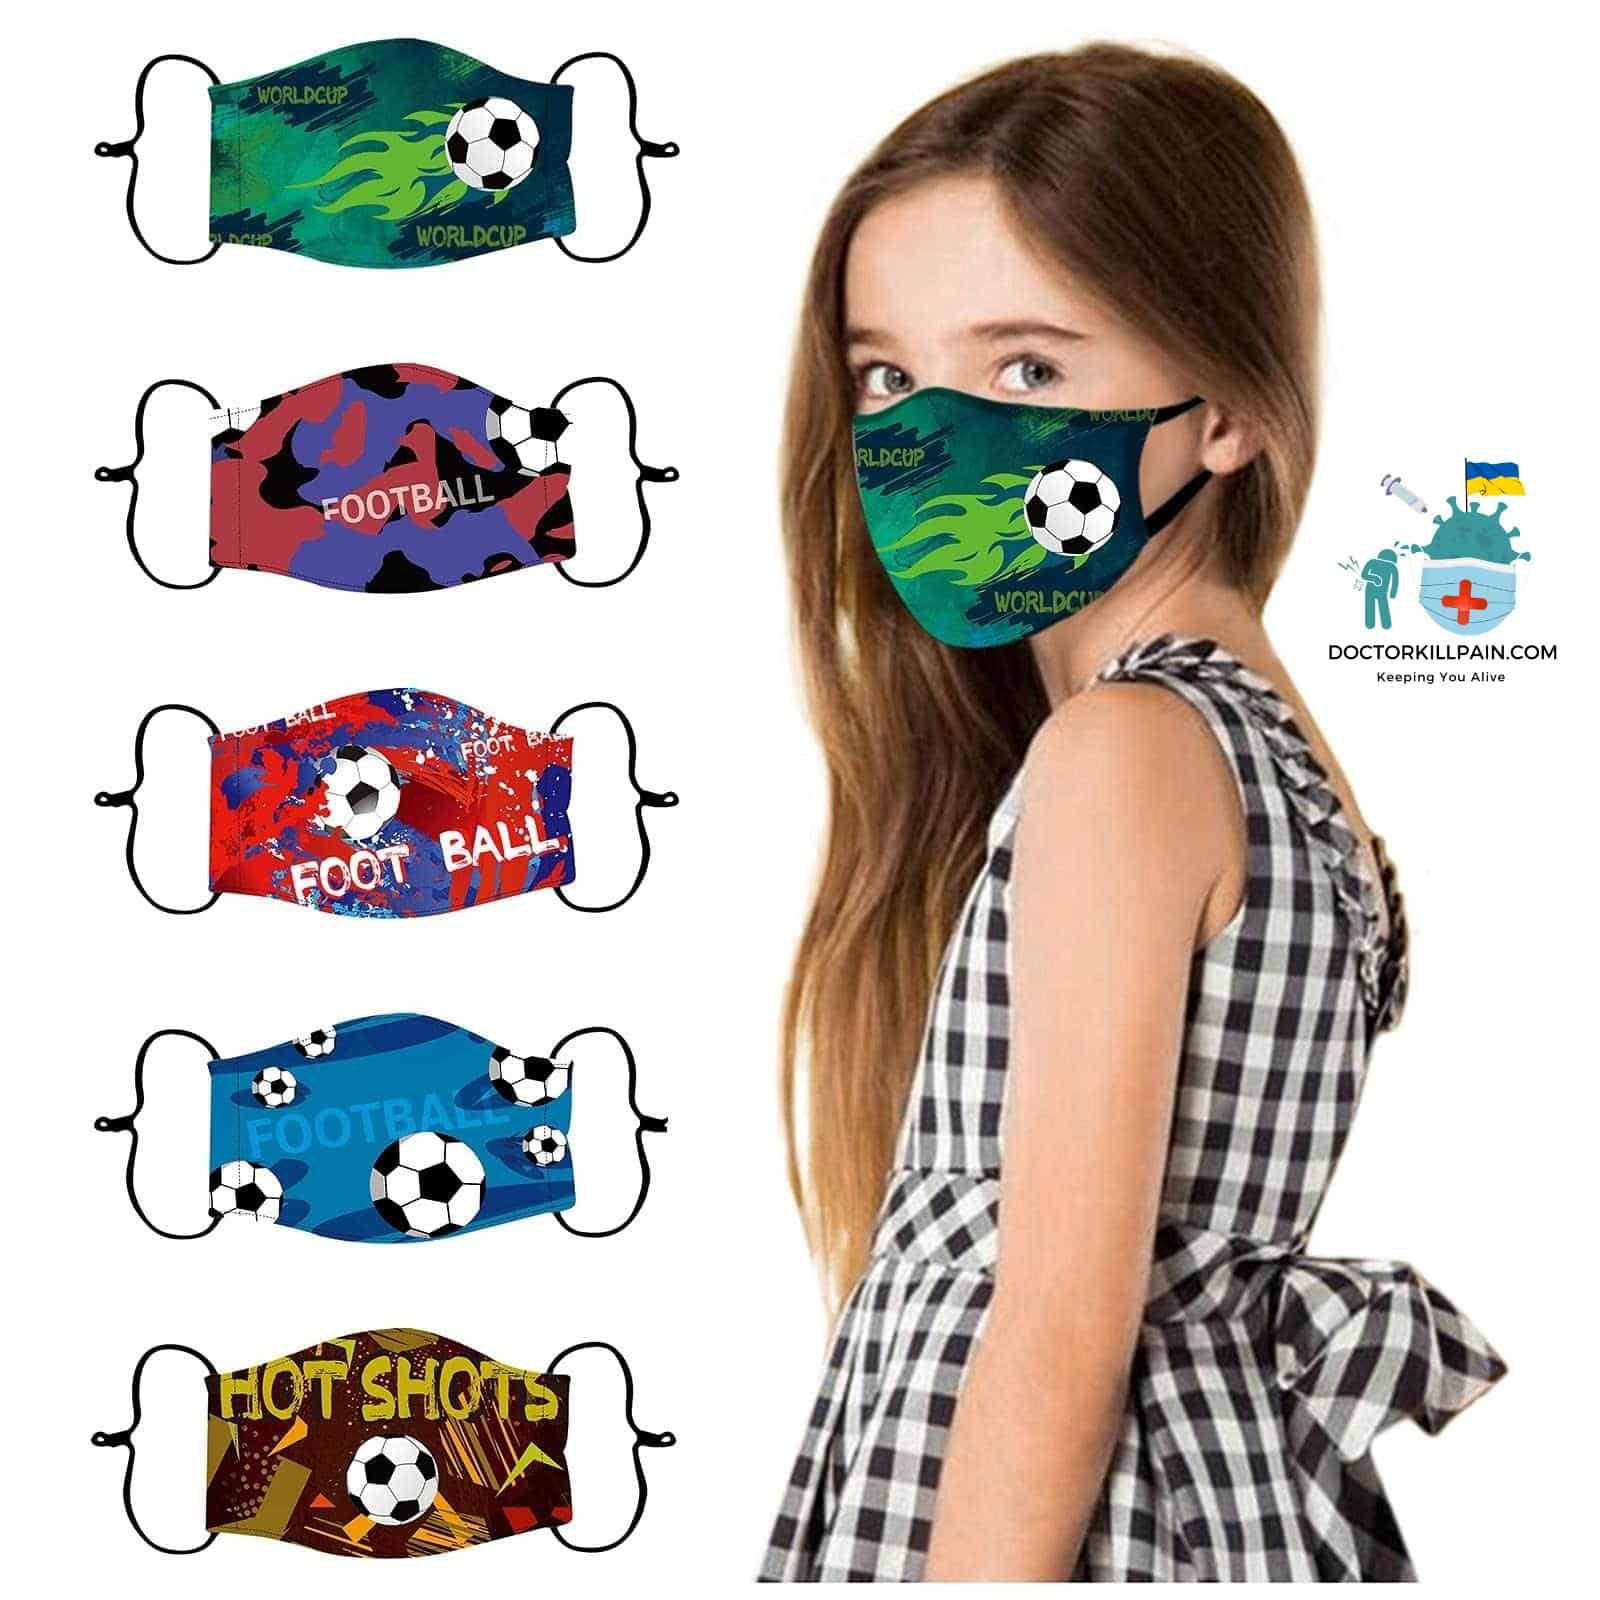 Adjustable Anonymous Mask For Children Printed Reusable Mouth Face Masks Cubrebocas Para Niños Washable Halloween Cosplay Masque